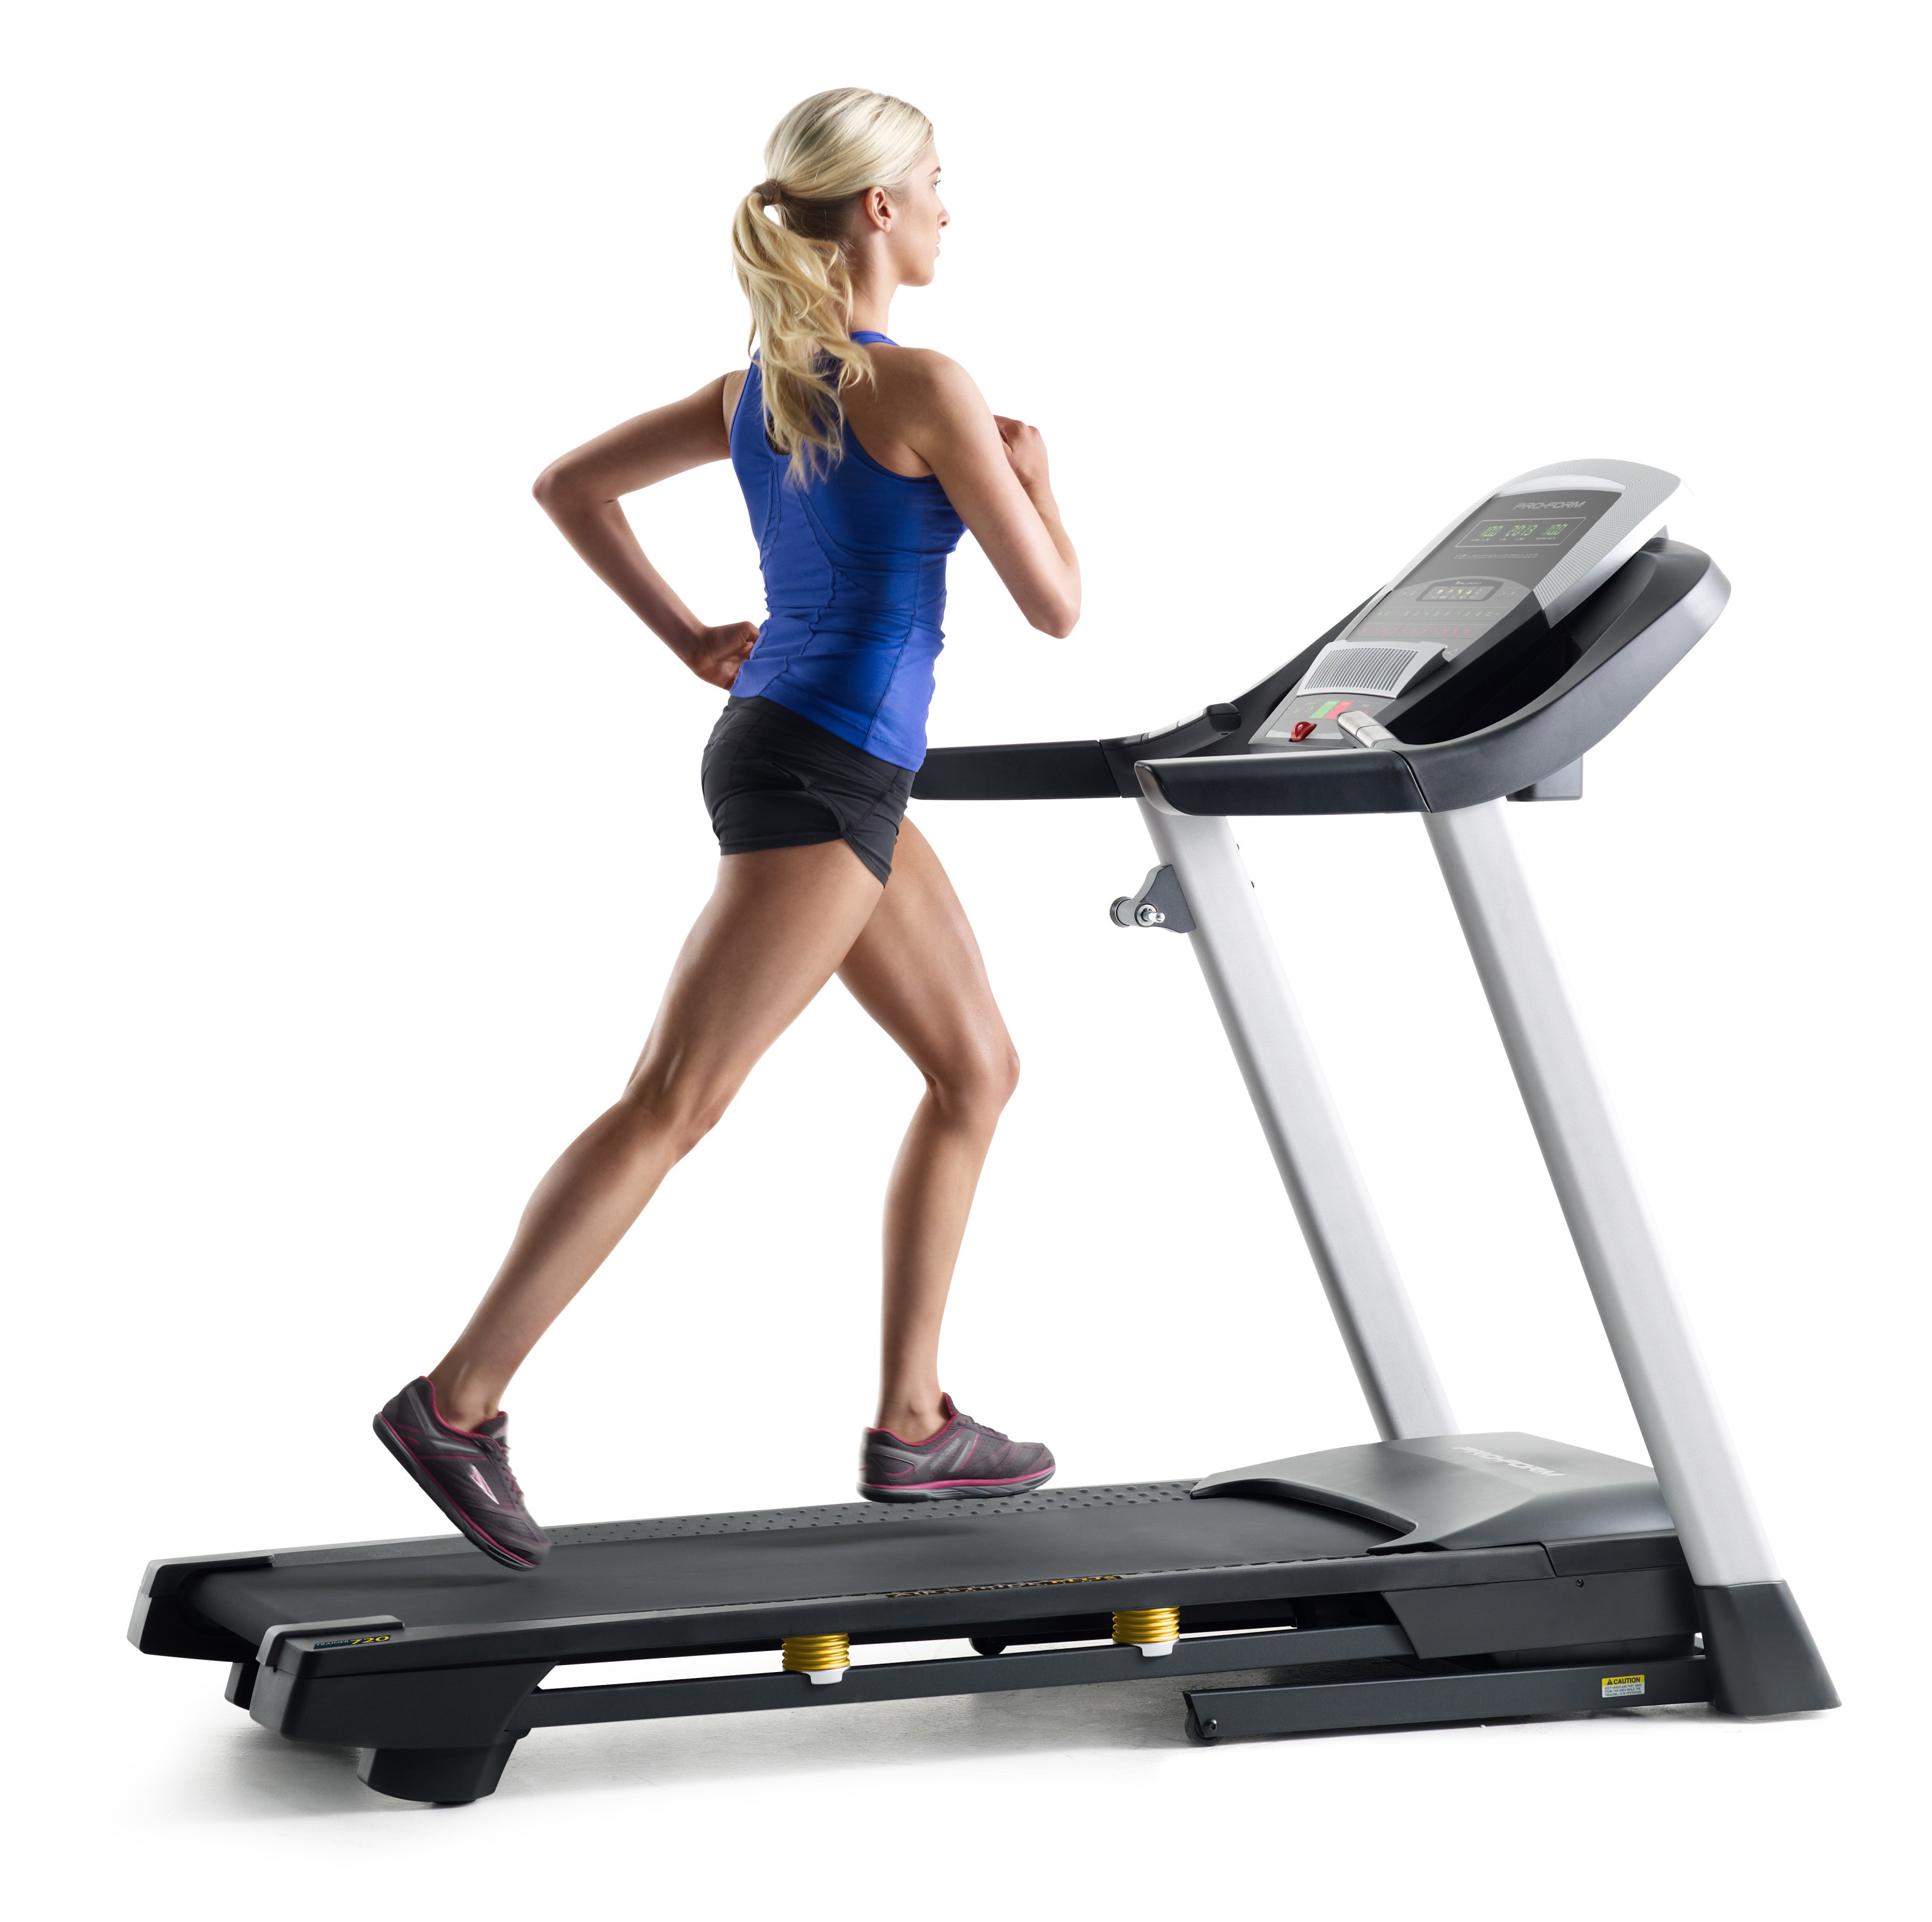 ProForm Trainer 720 Folding Treadmill with 10% Incline Training, 10 MPH Speed Controls